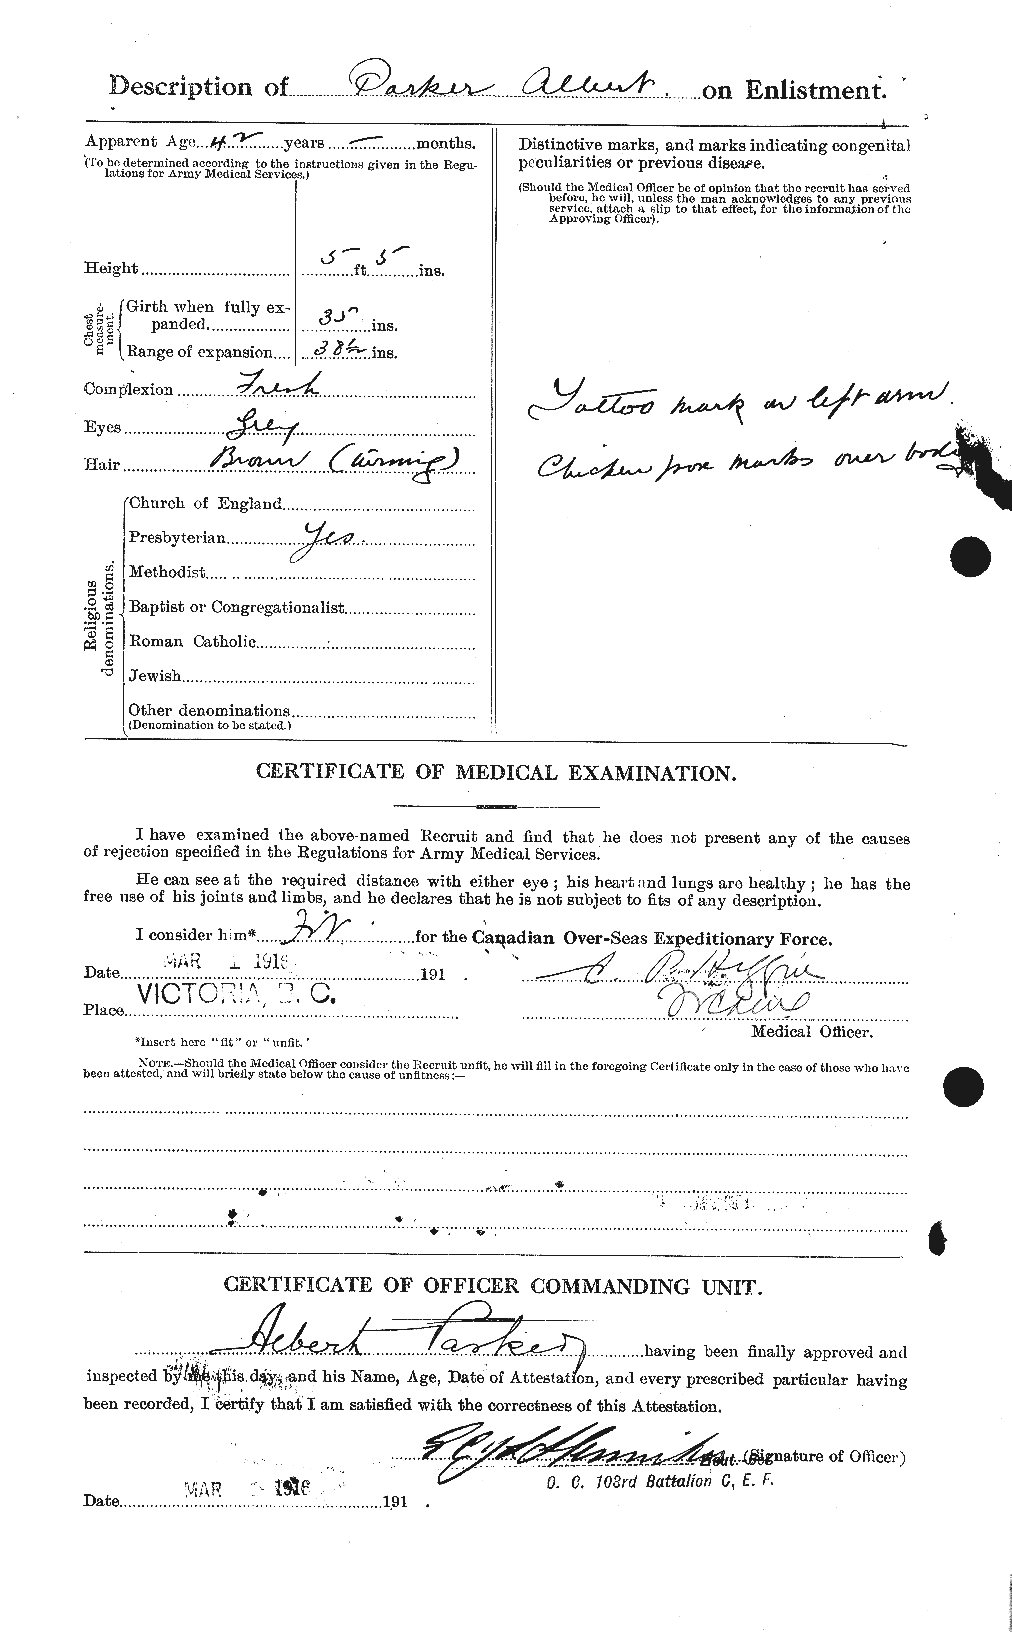 Personnel Records of the First World War - CEF 564958b